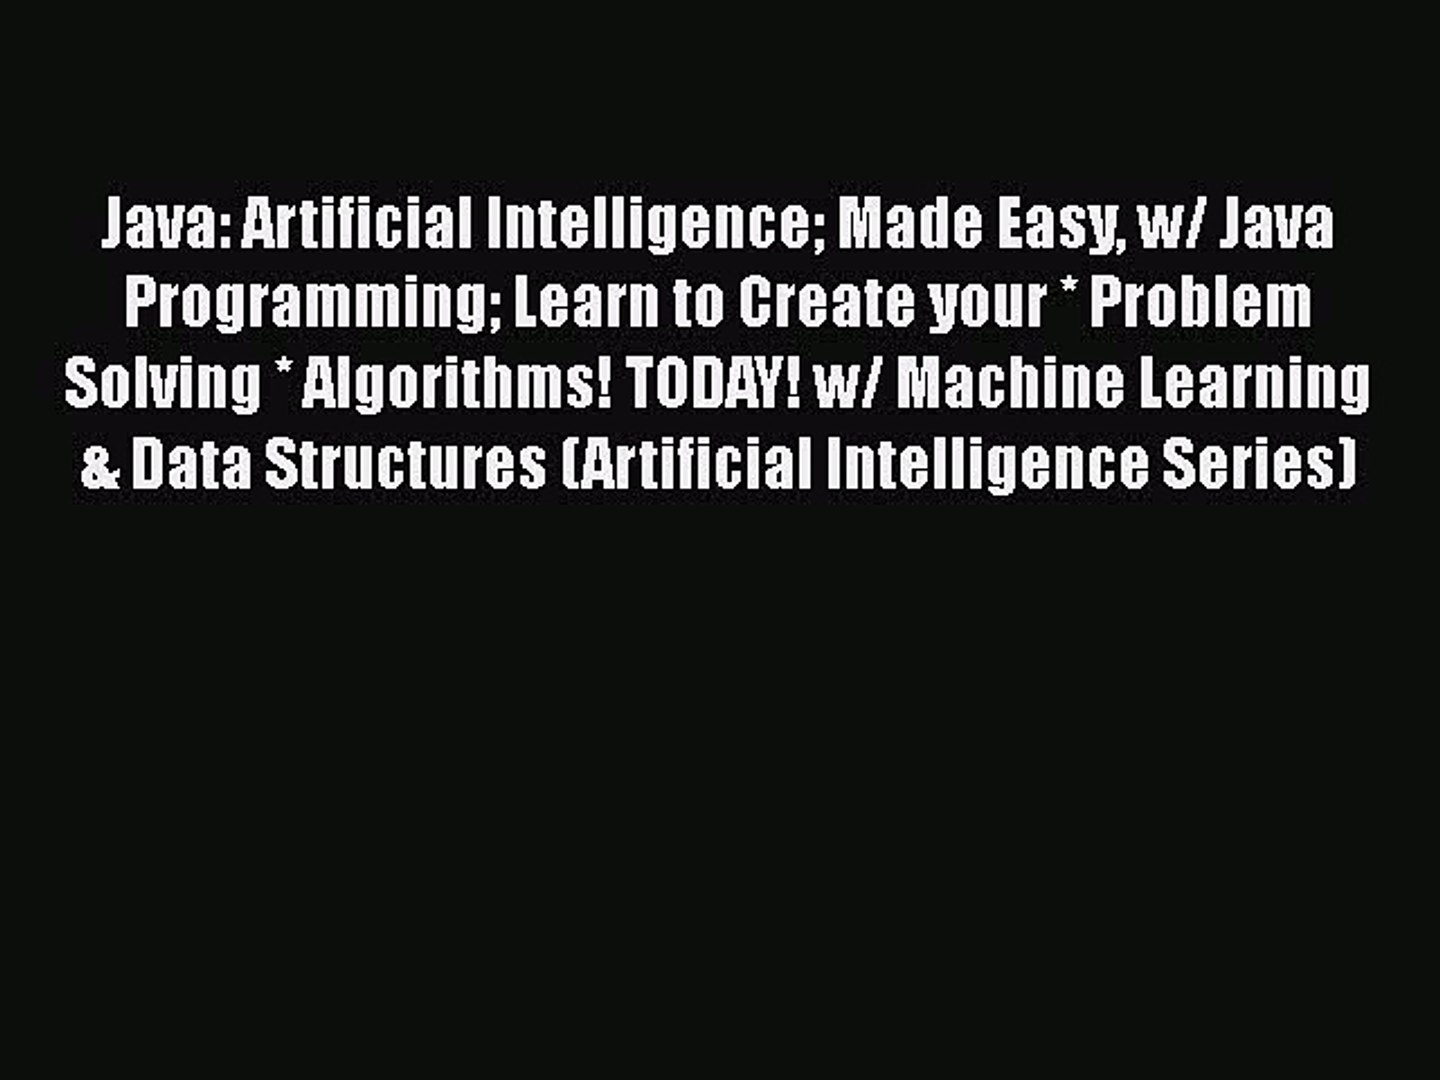 PDF Java: Artificial Intelligence Made Easy w/ Java Programming Learn to Create your * Problem